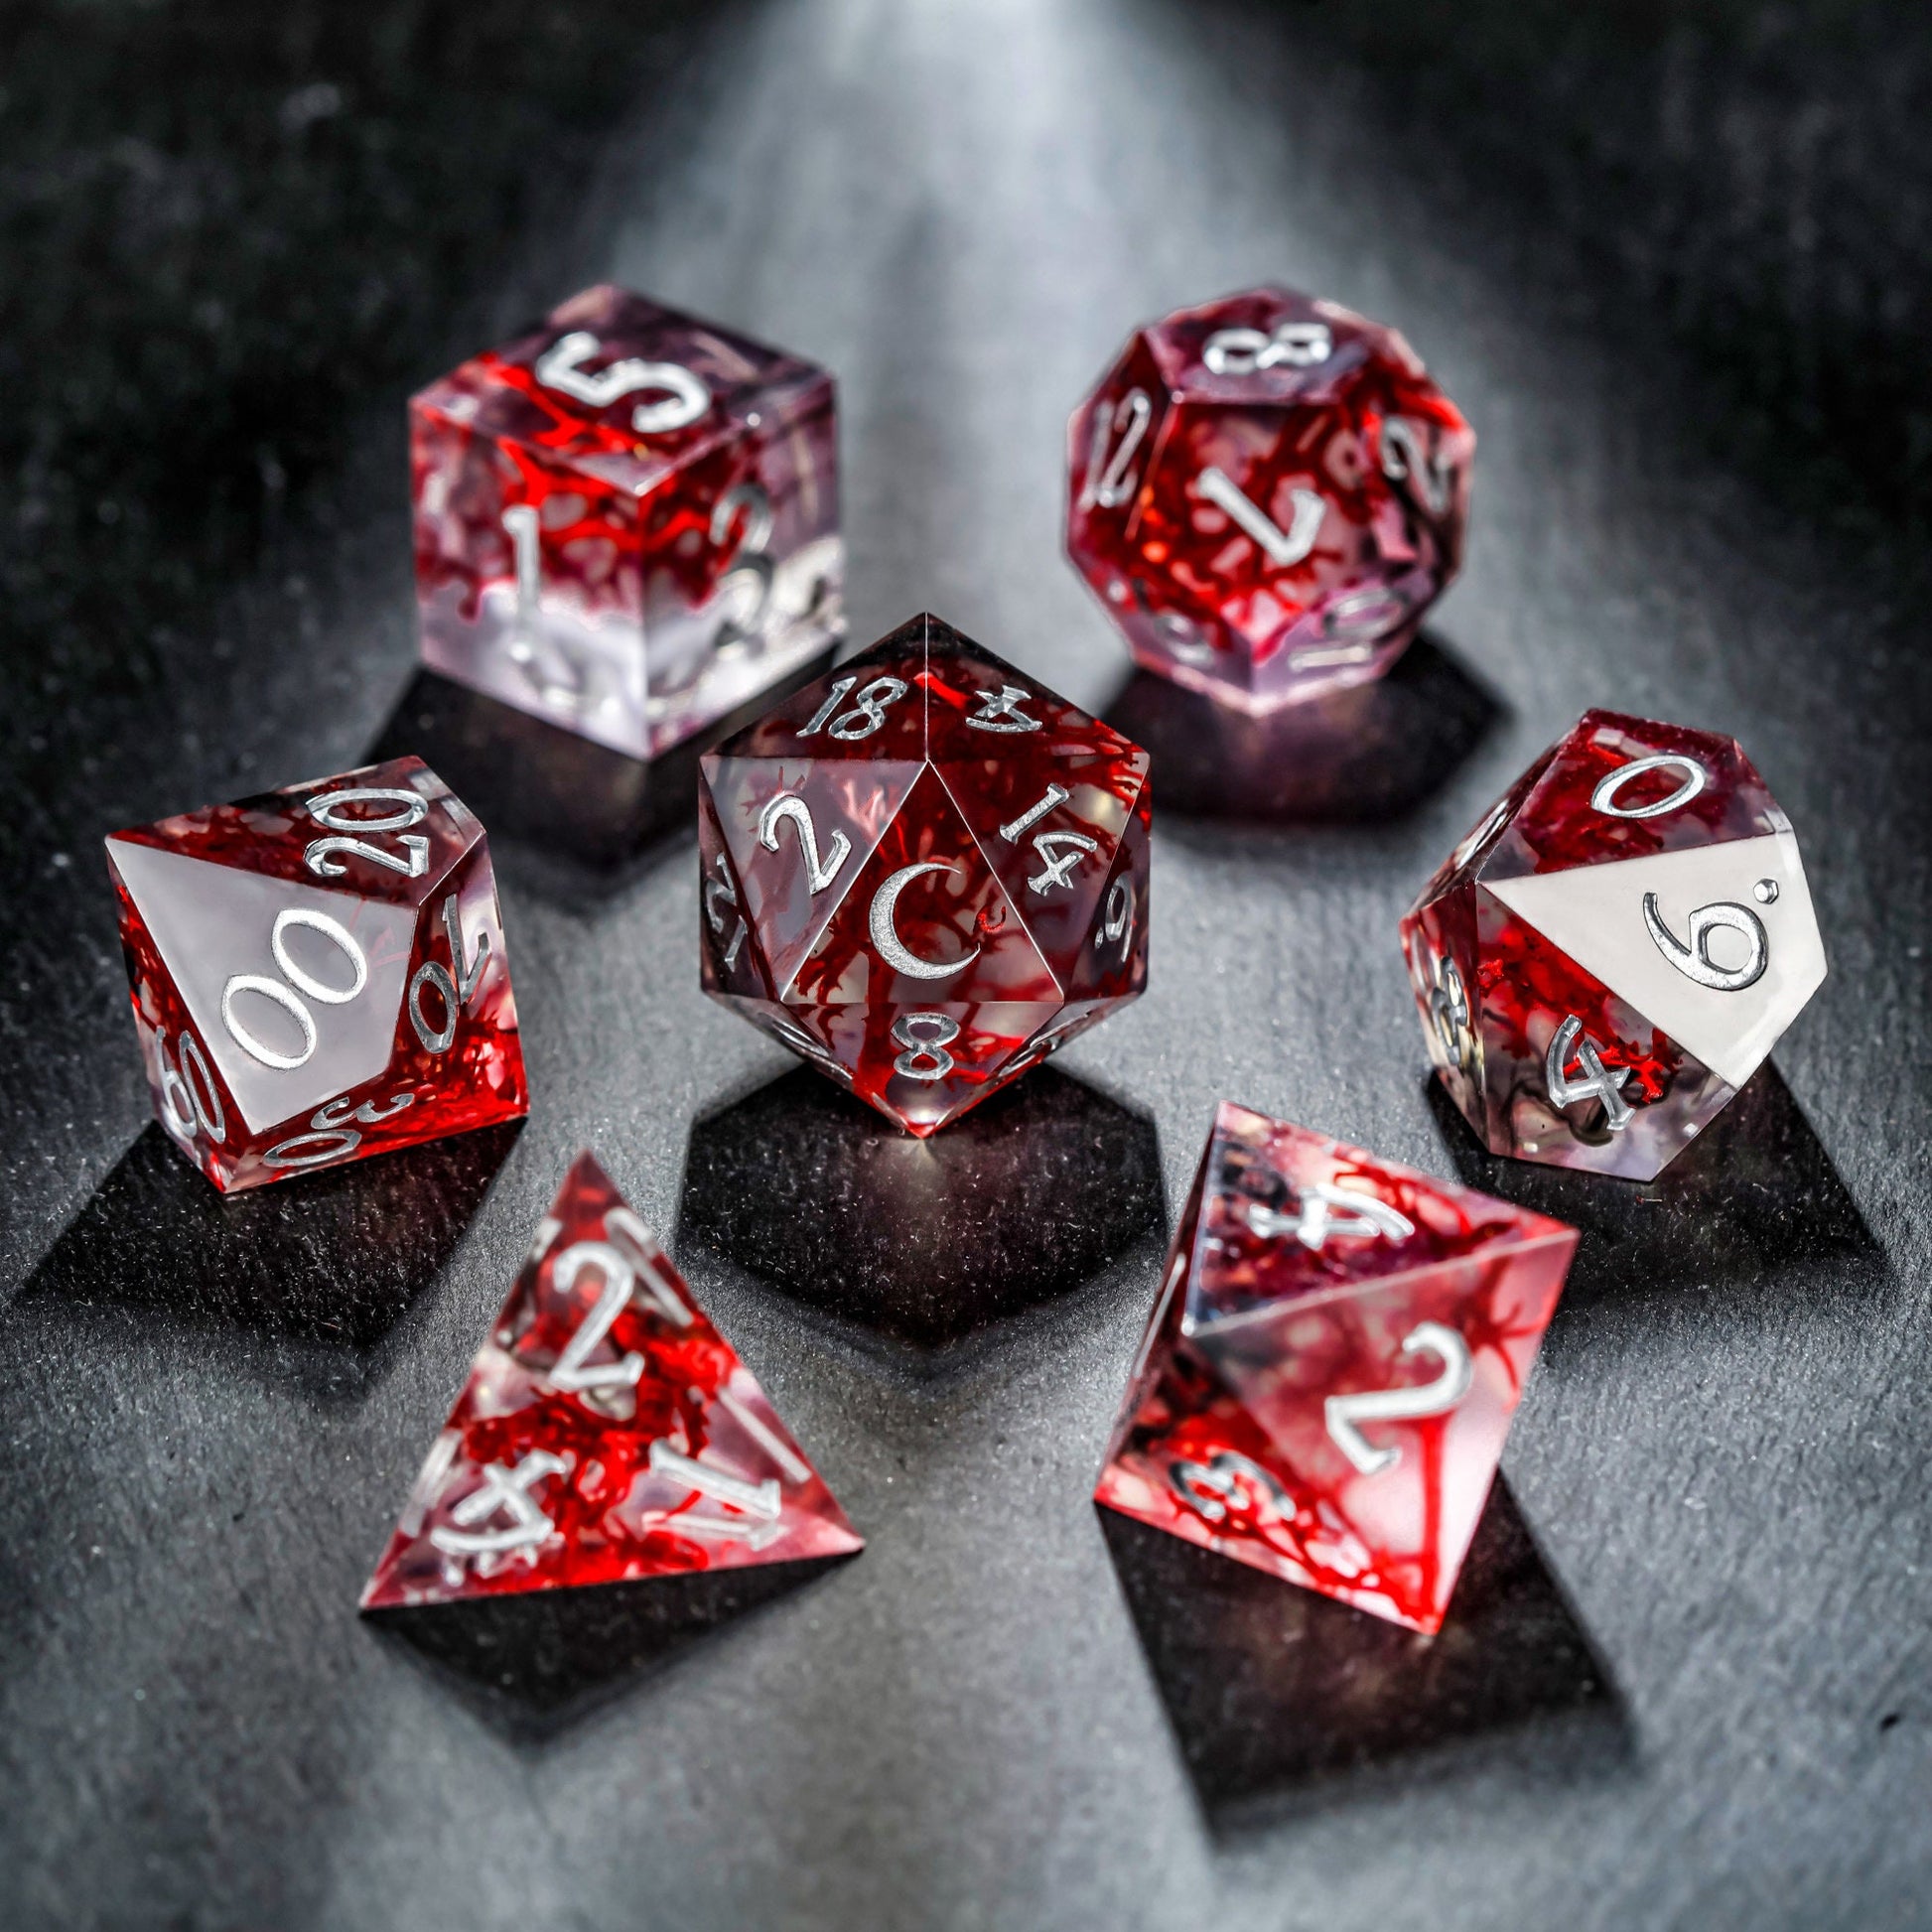 Red Coral Moon DnD D&D Dice Set - CrystalMaggie